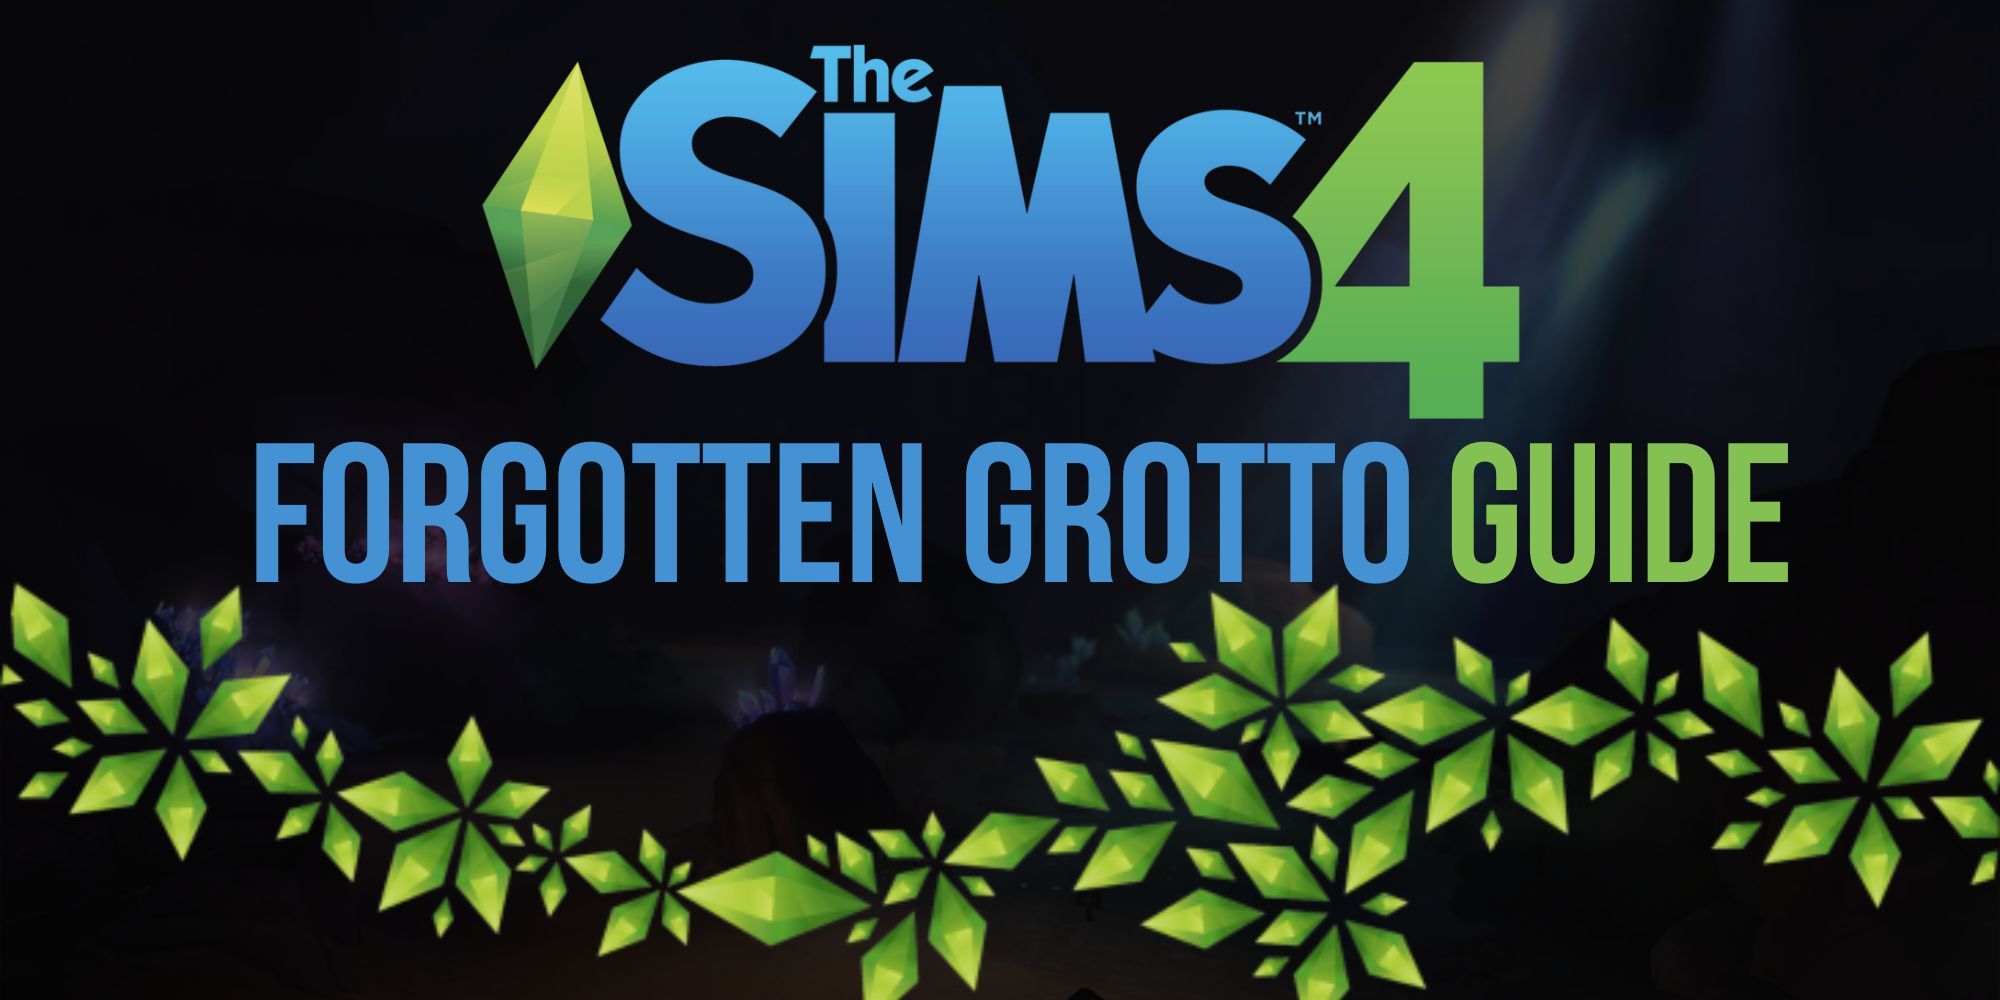 The Sims 4 Forgotten Grotto Guide Thumbnail